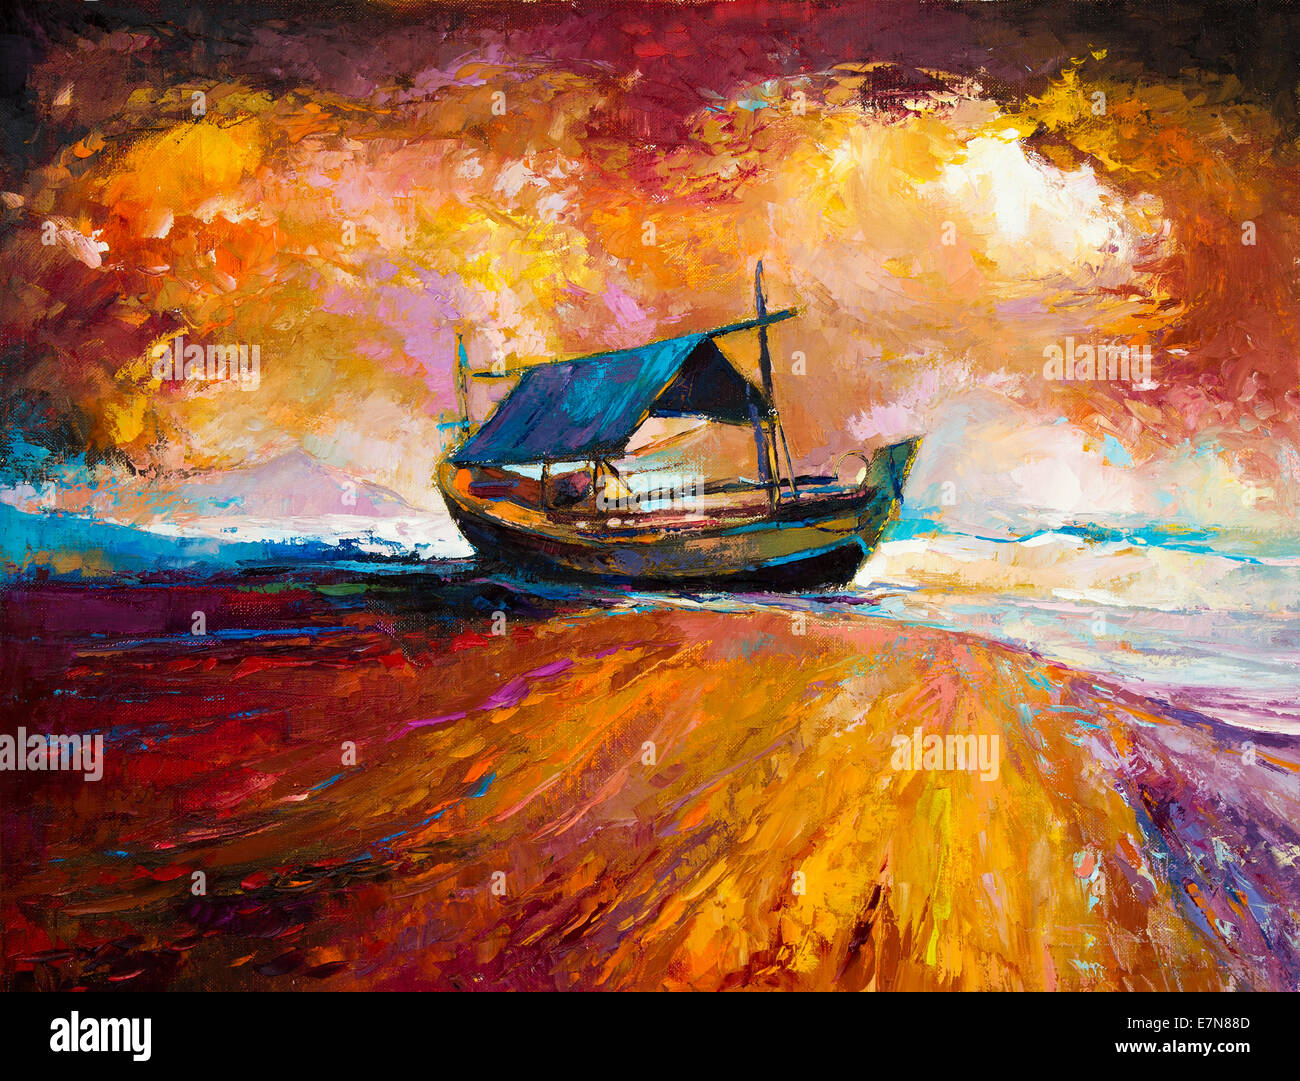 Original oil painting of fishing boat and sea on canvas.Rich golden Sunset over ocean.Modern Impressionism Stock Photo